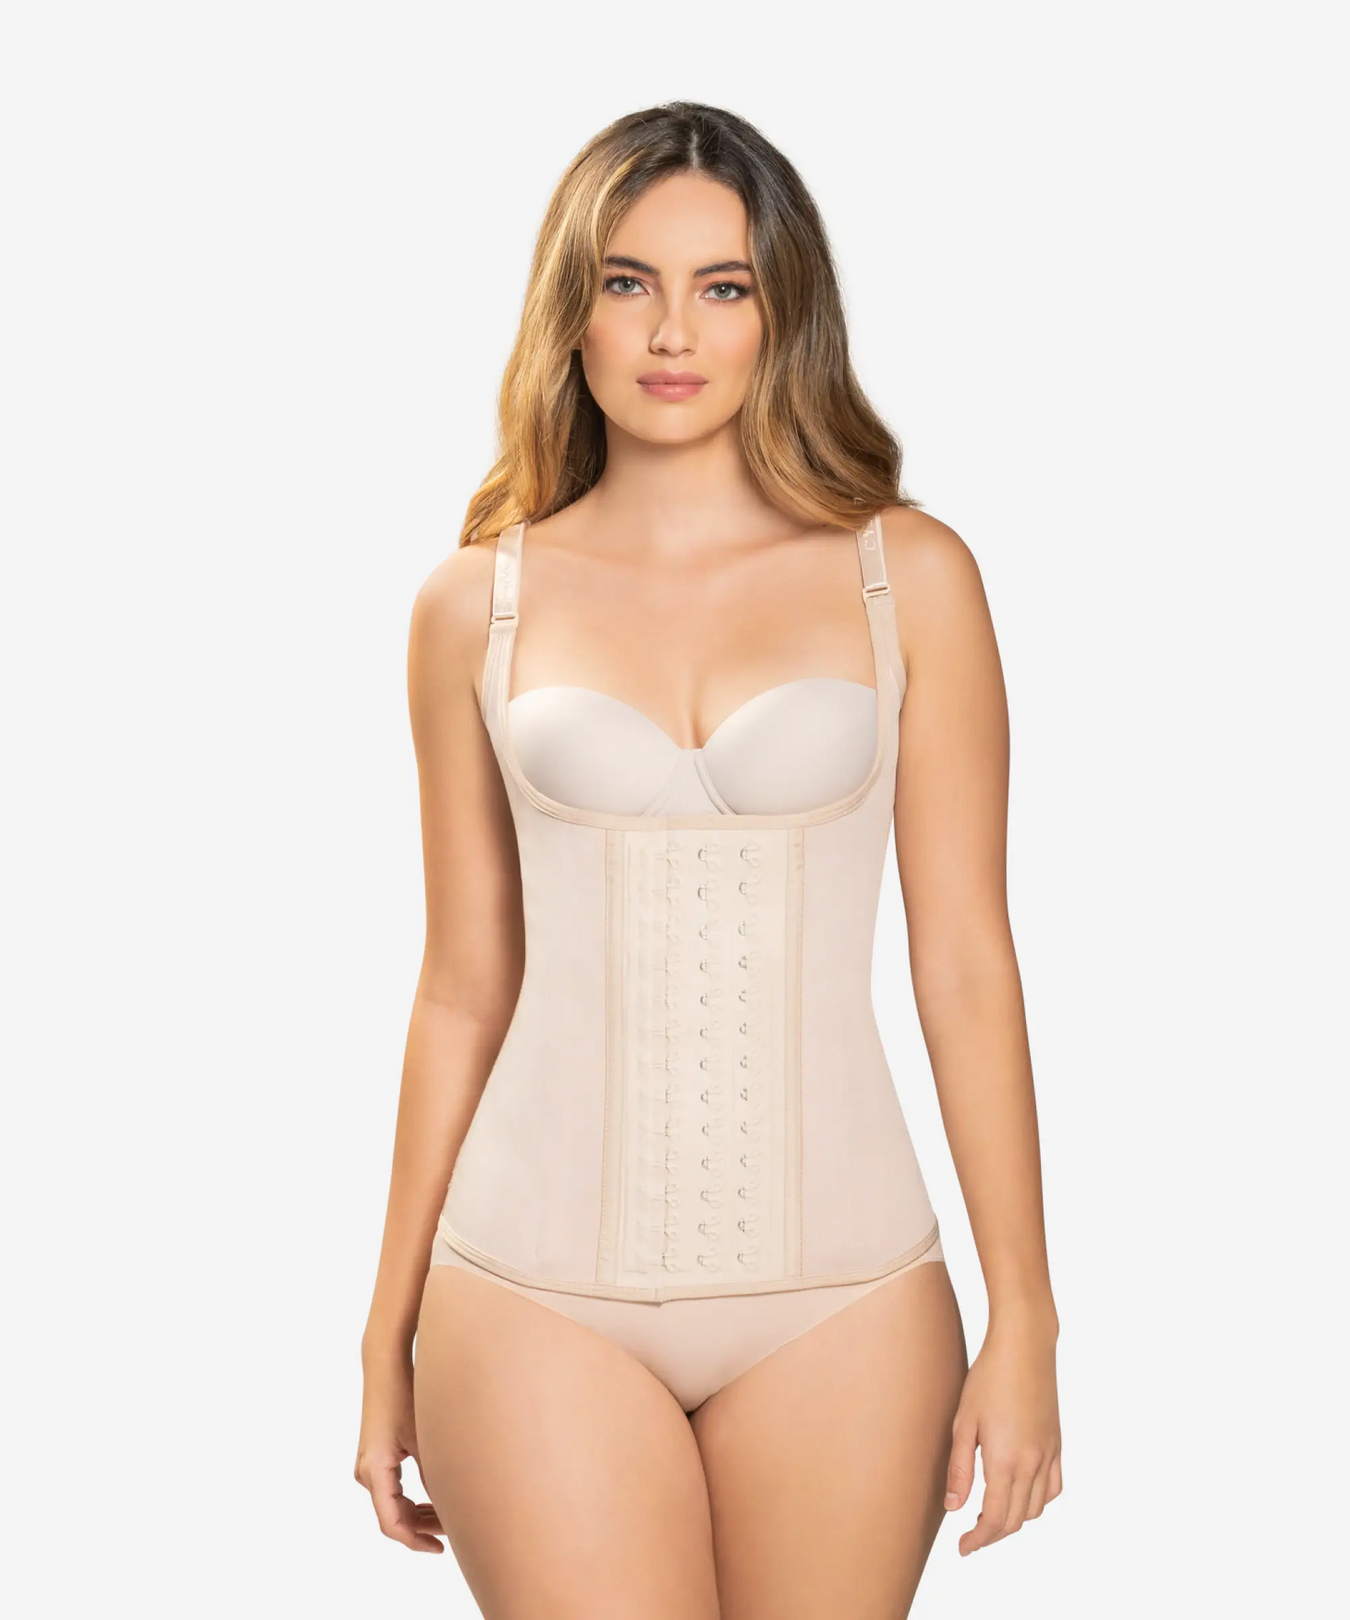 Shapewear for the inverted triangle body shapes!